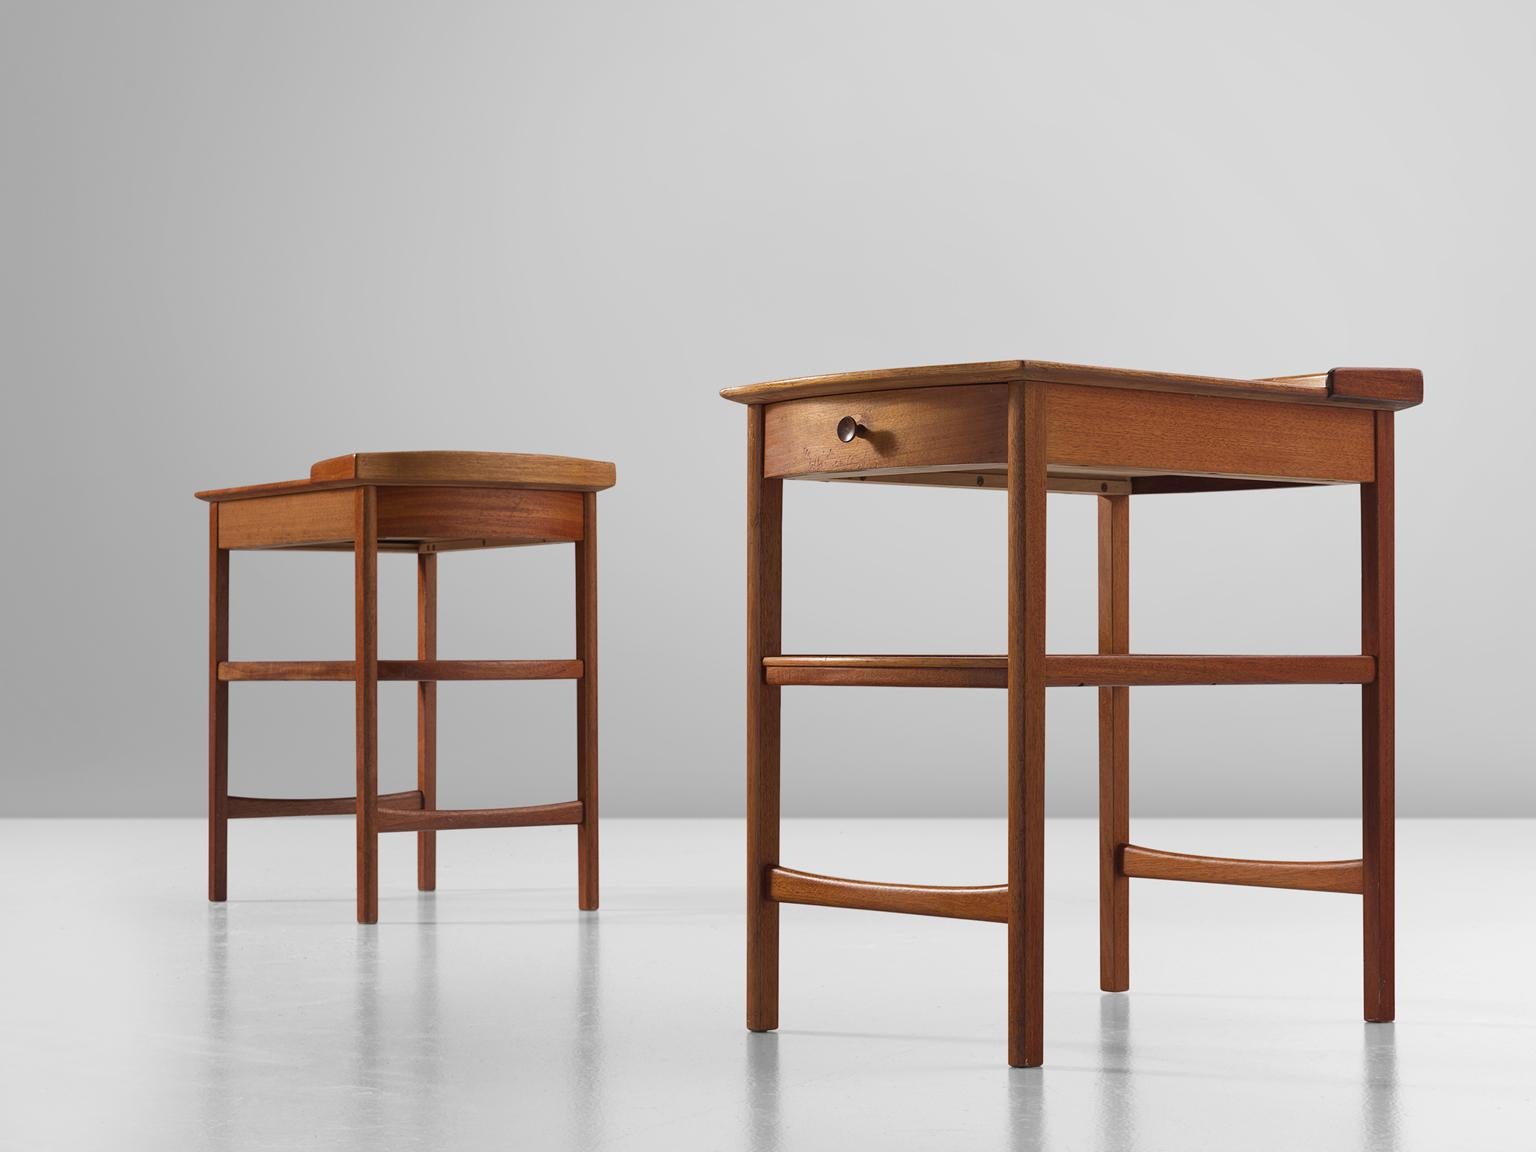 Carl Malmsten for Bodafors, pair of side tables, mahogany, Sweden, 1962.

This modest set of nightstands is designed by the Swede Carl Malmsten. The table feature an underlying shelf and rail with small drawer. The drawers are finished with a